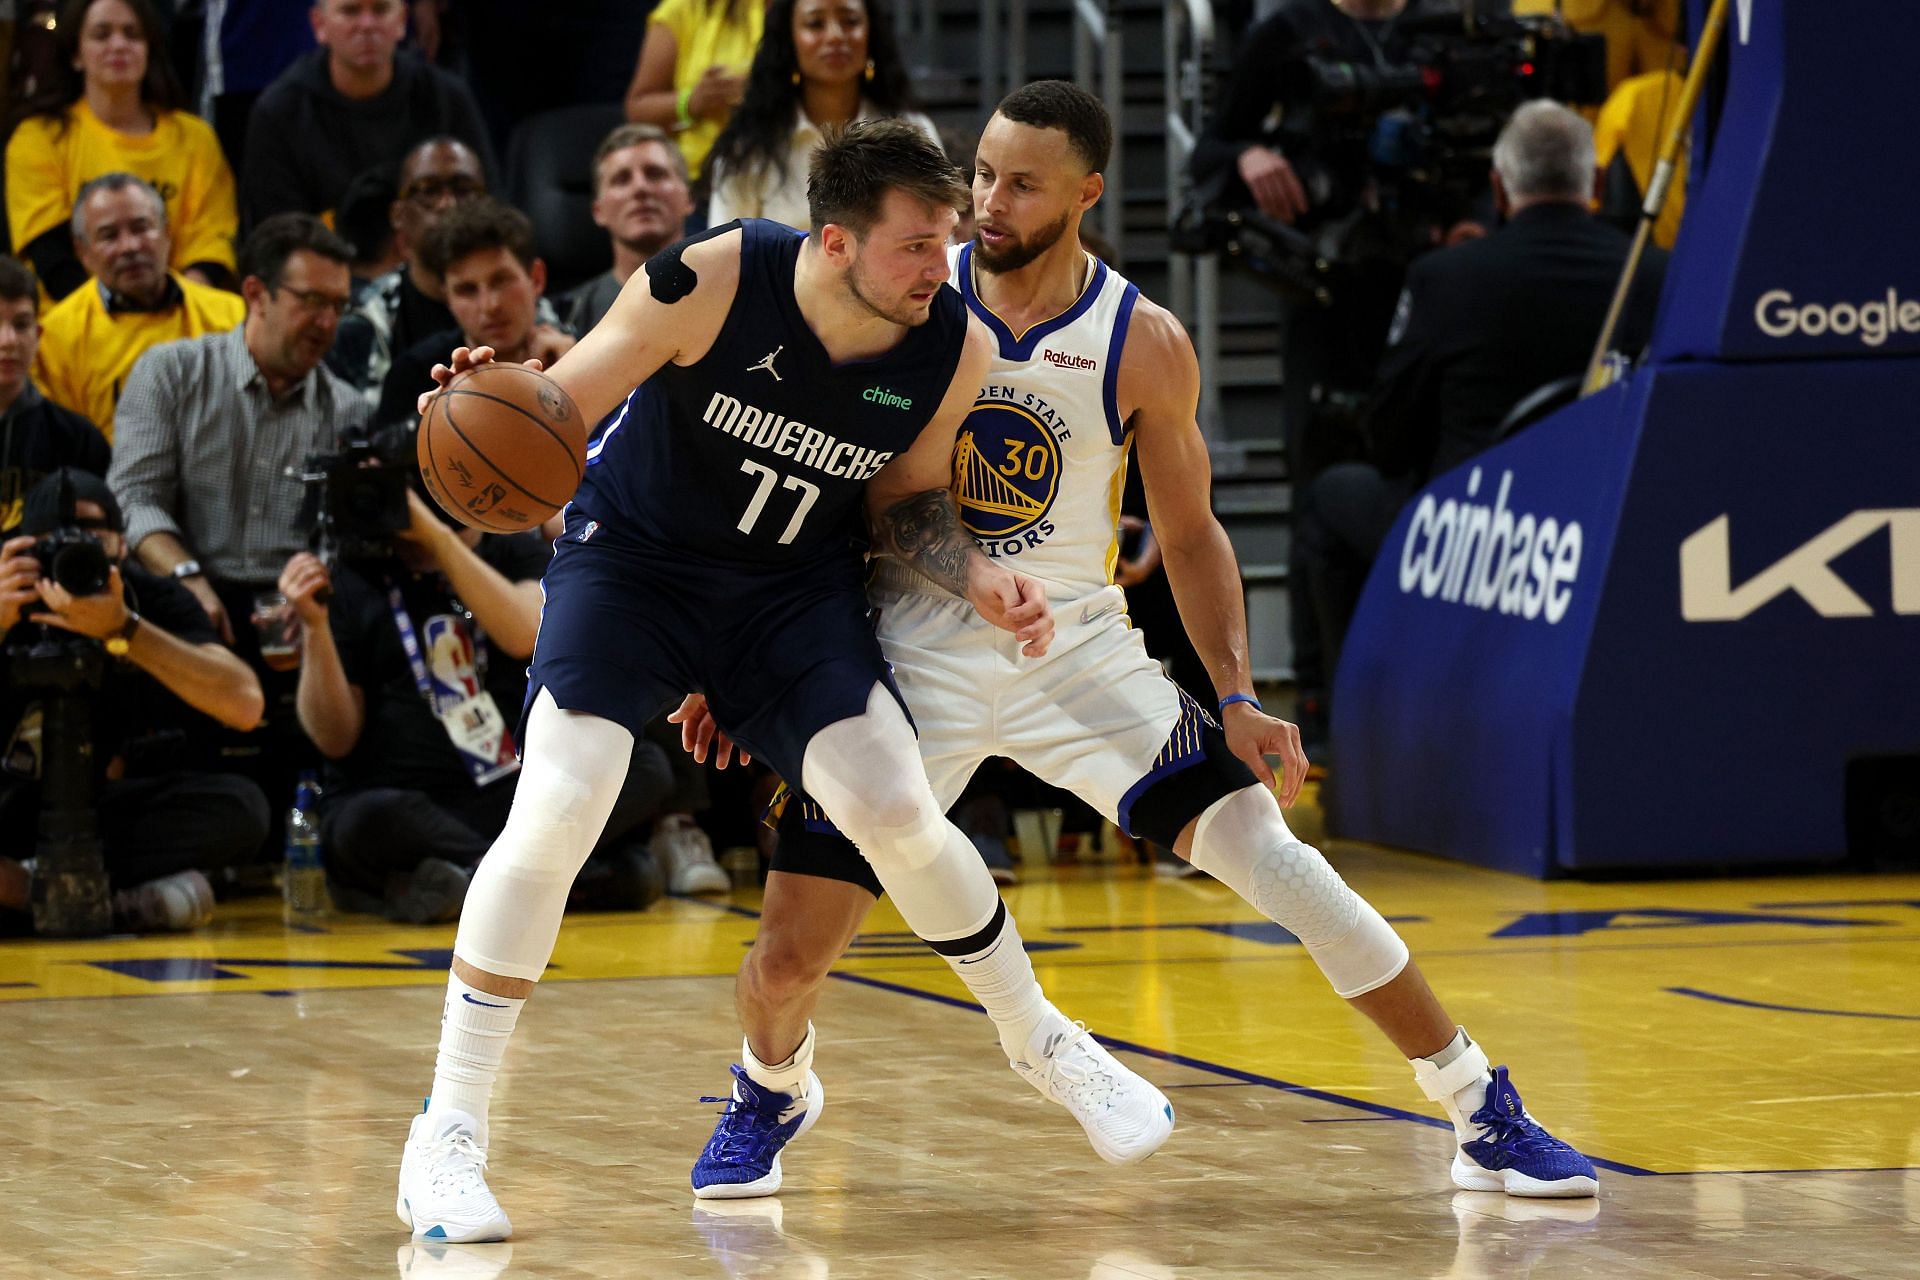 The Dallas Mavericks are couting on Luka Doncic to give them their first win of the series.